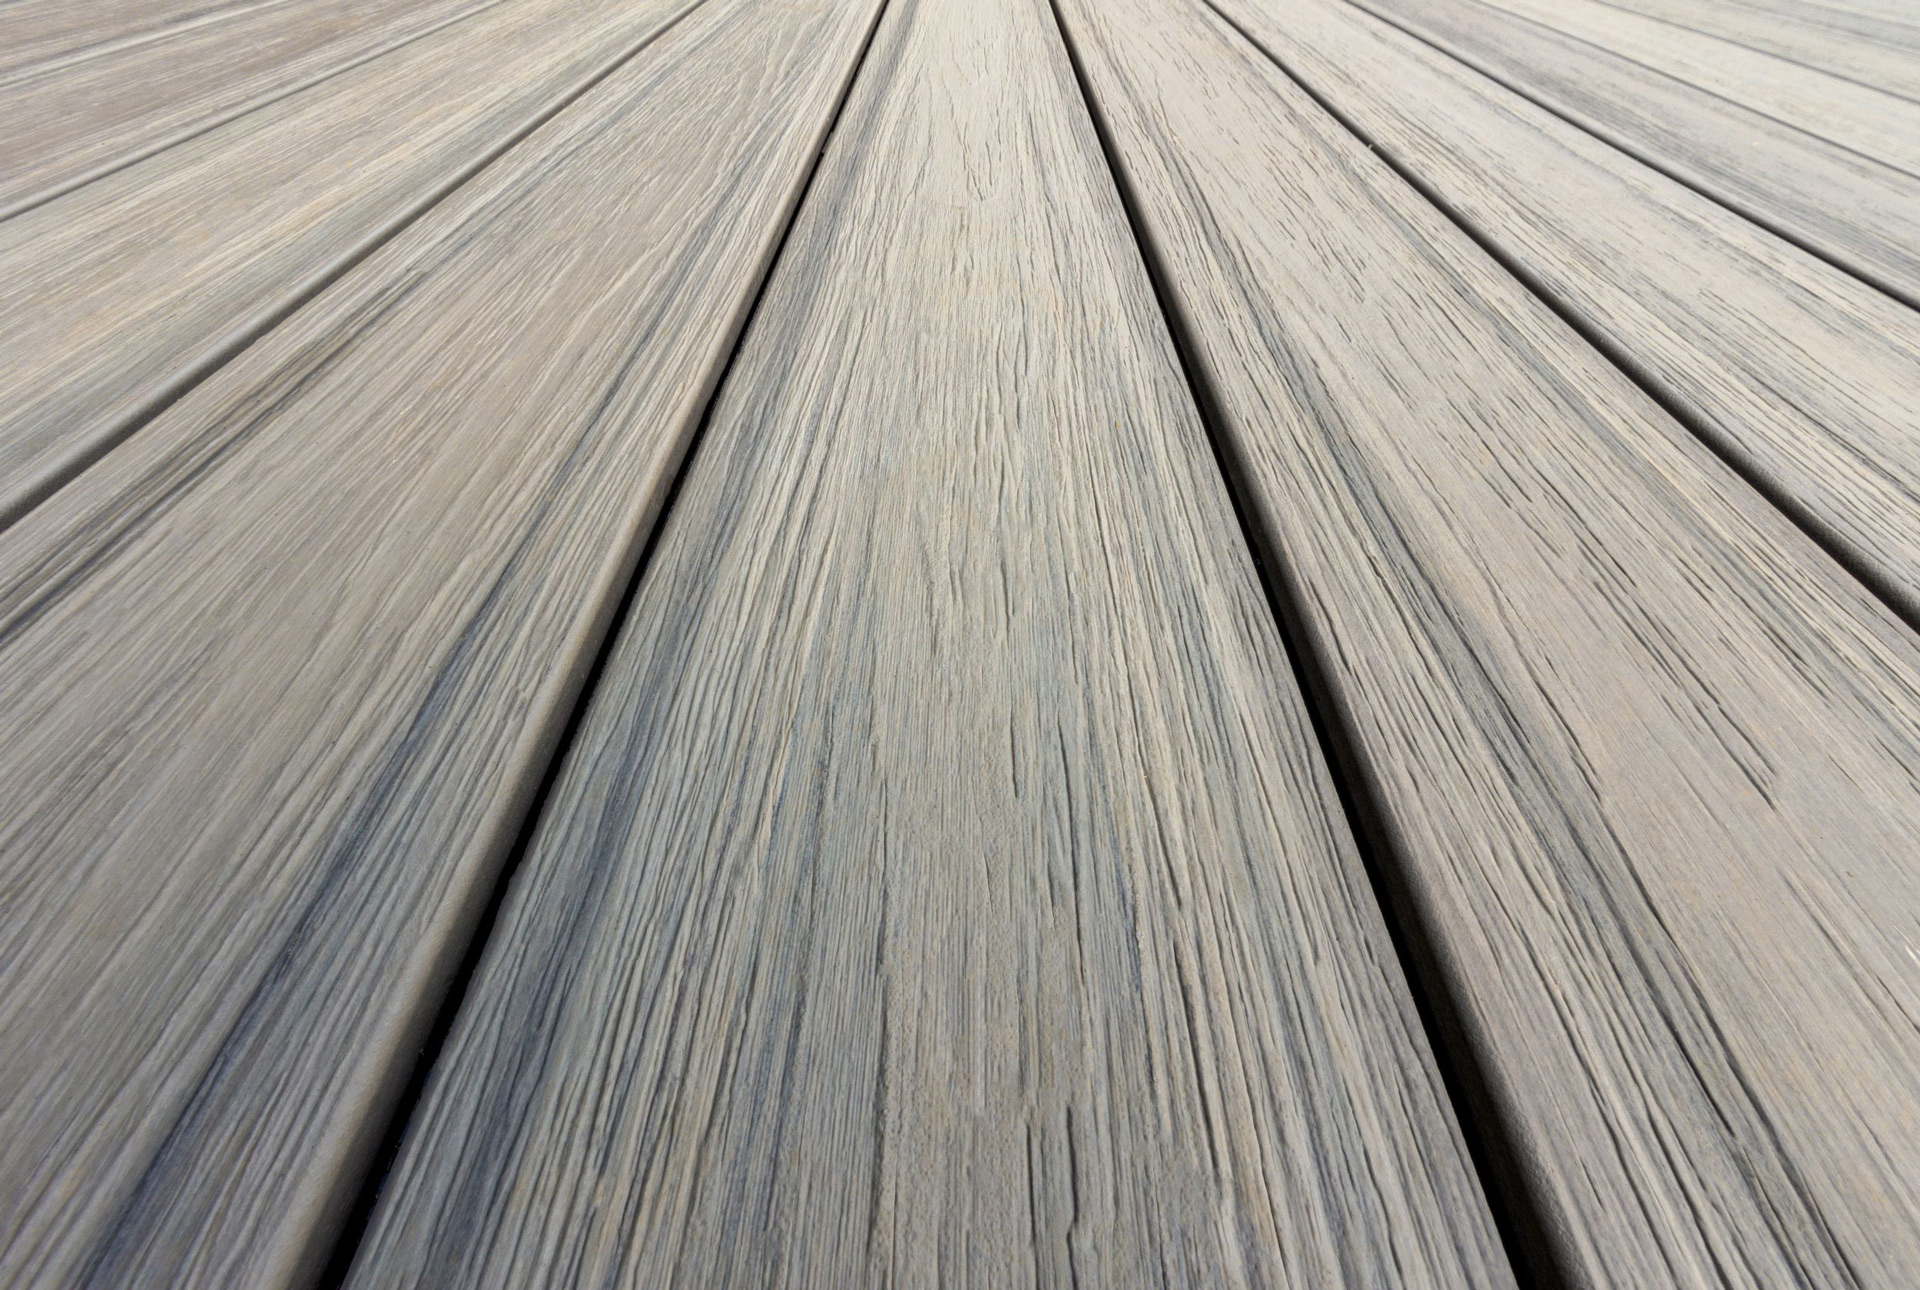 Caribbean Coral great composite deck boards